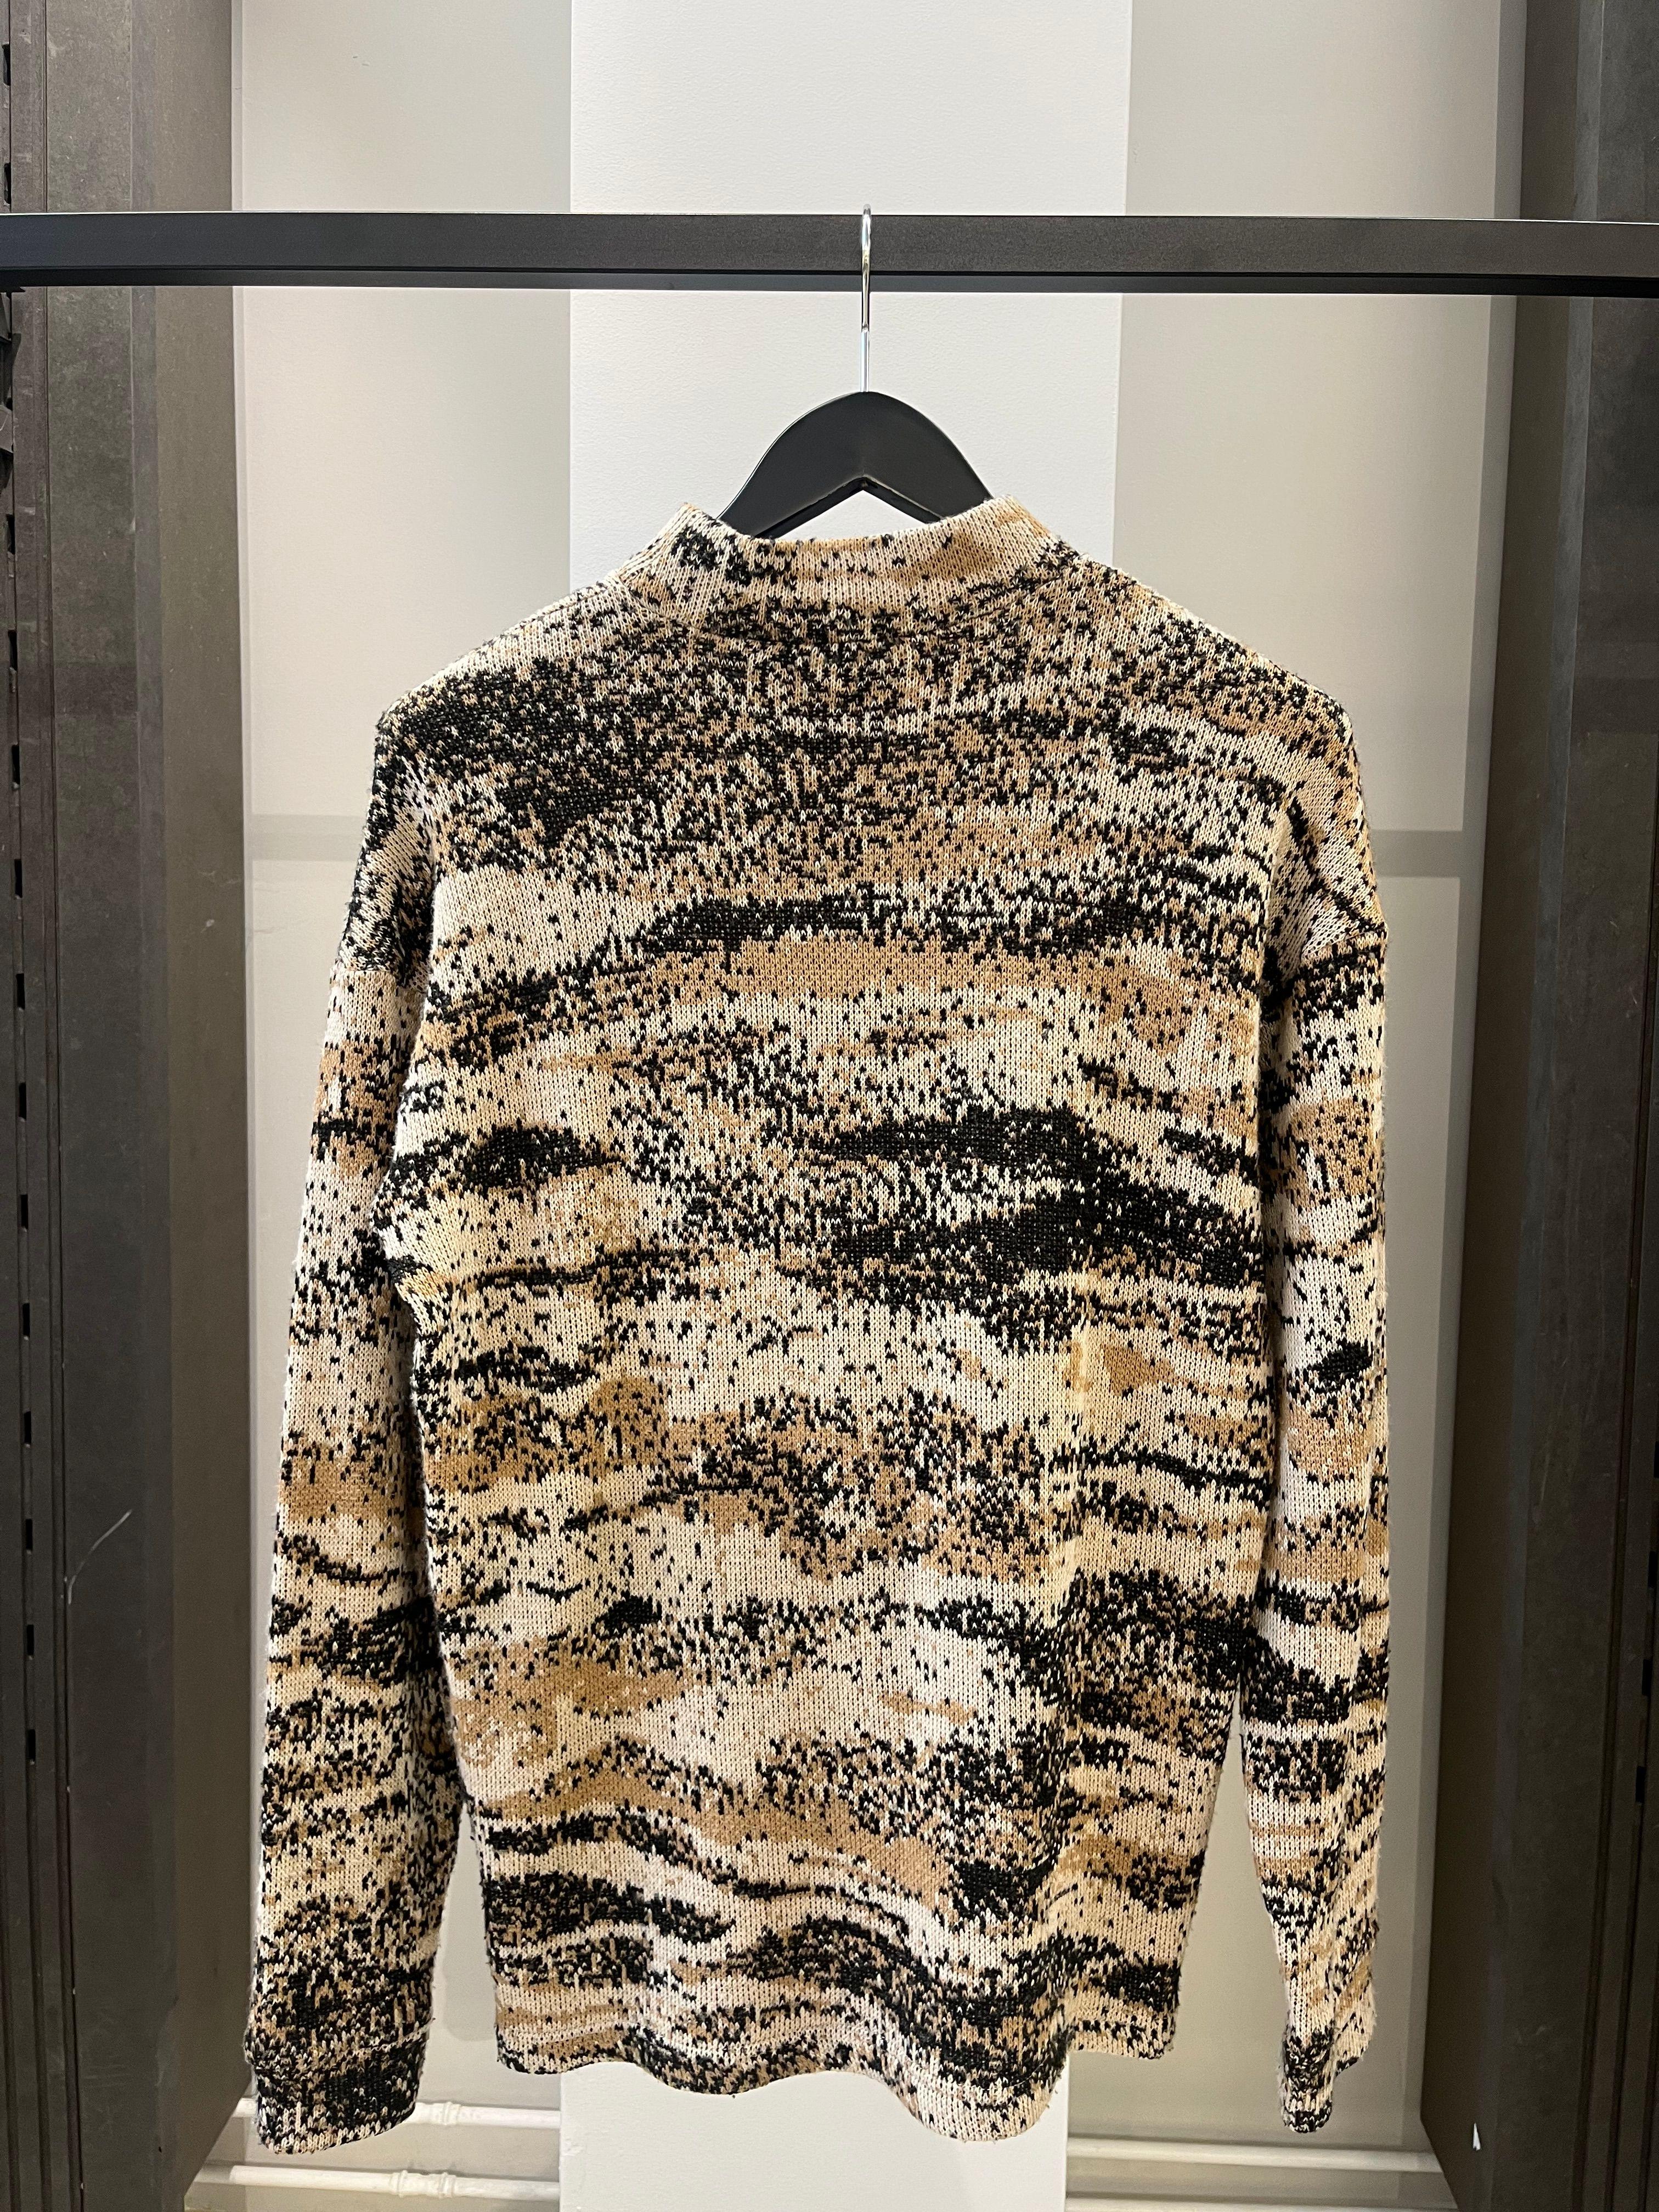 Raf Simons
2003 Virginia Creeper Knit Turtleneck Sweater
Size 46

Stunning Virginia Creeper knit turtleneck sweater in a size 46, fits a s-m. In great condition without any flaws. OG piece made in Belgium.
